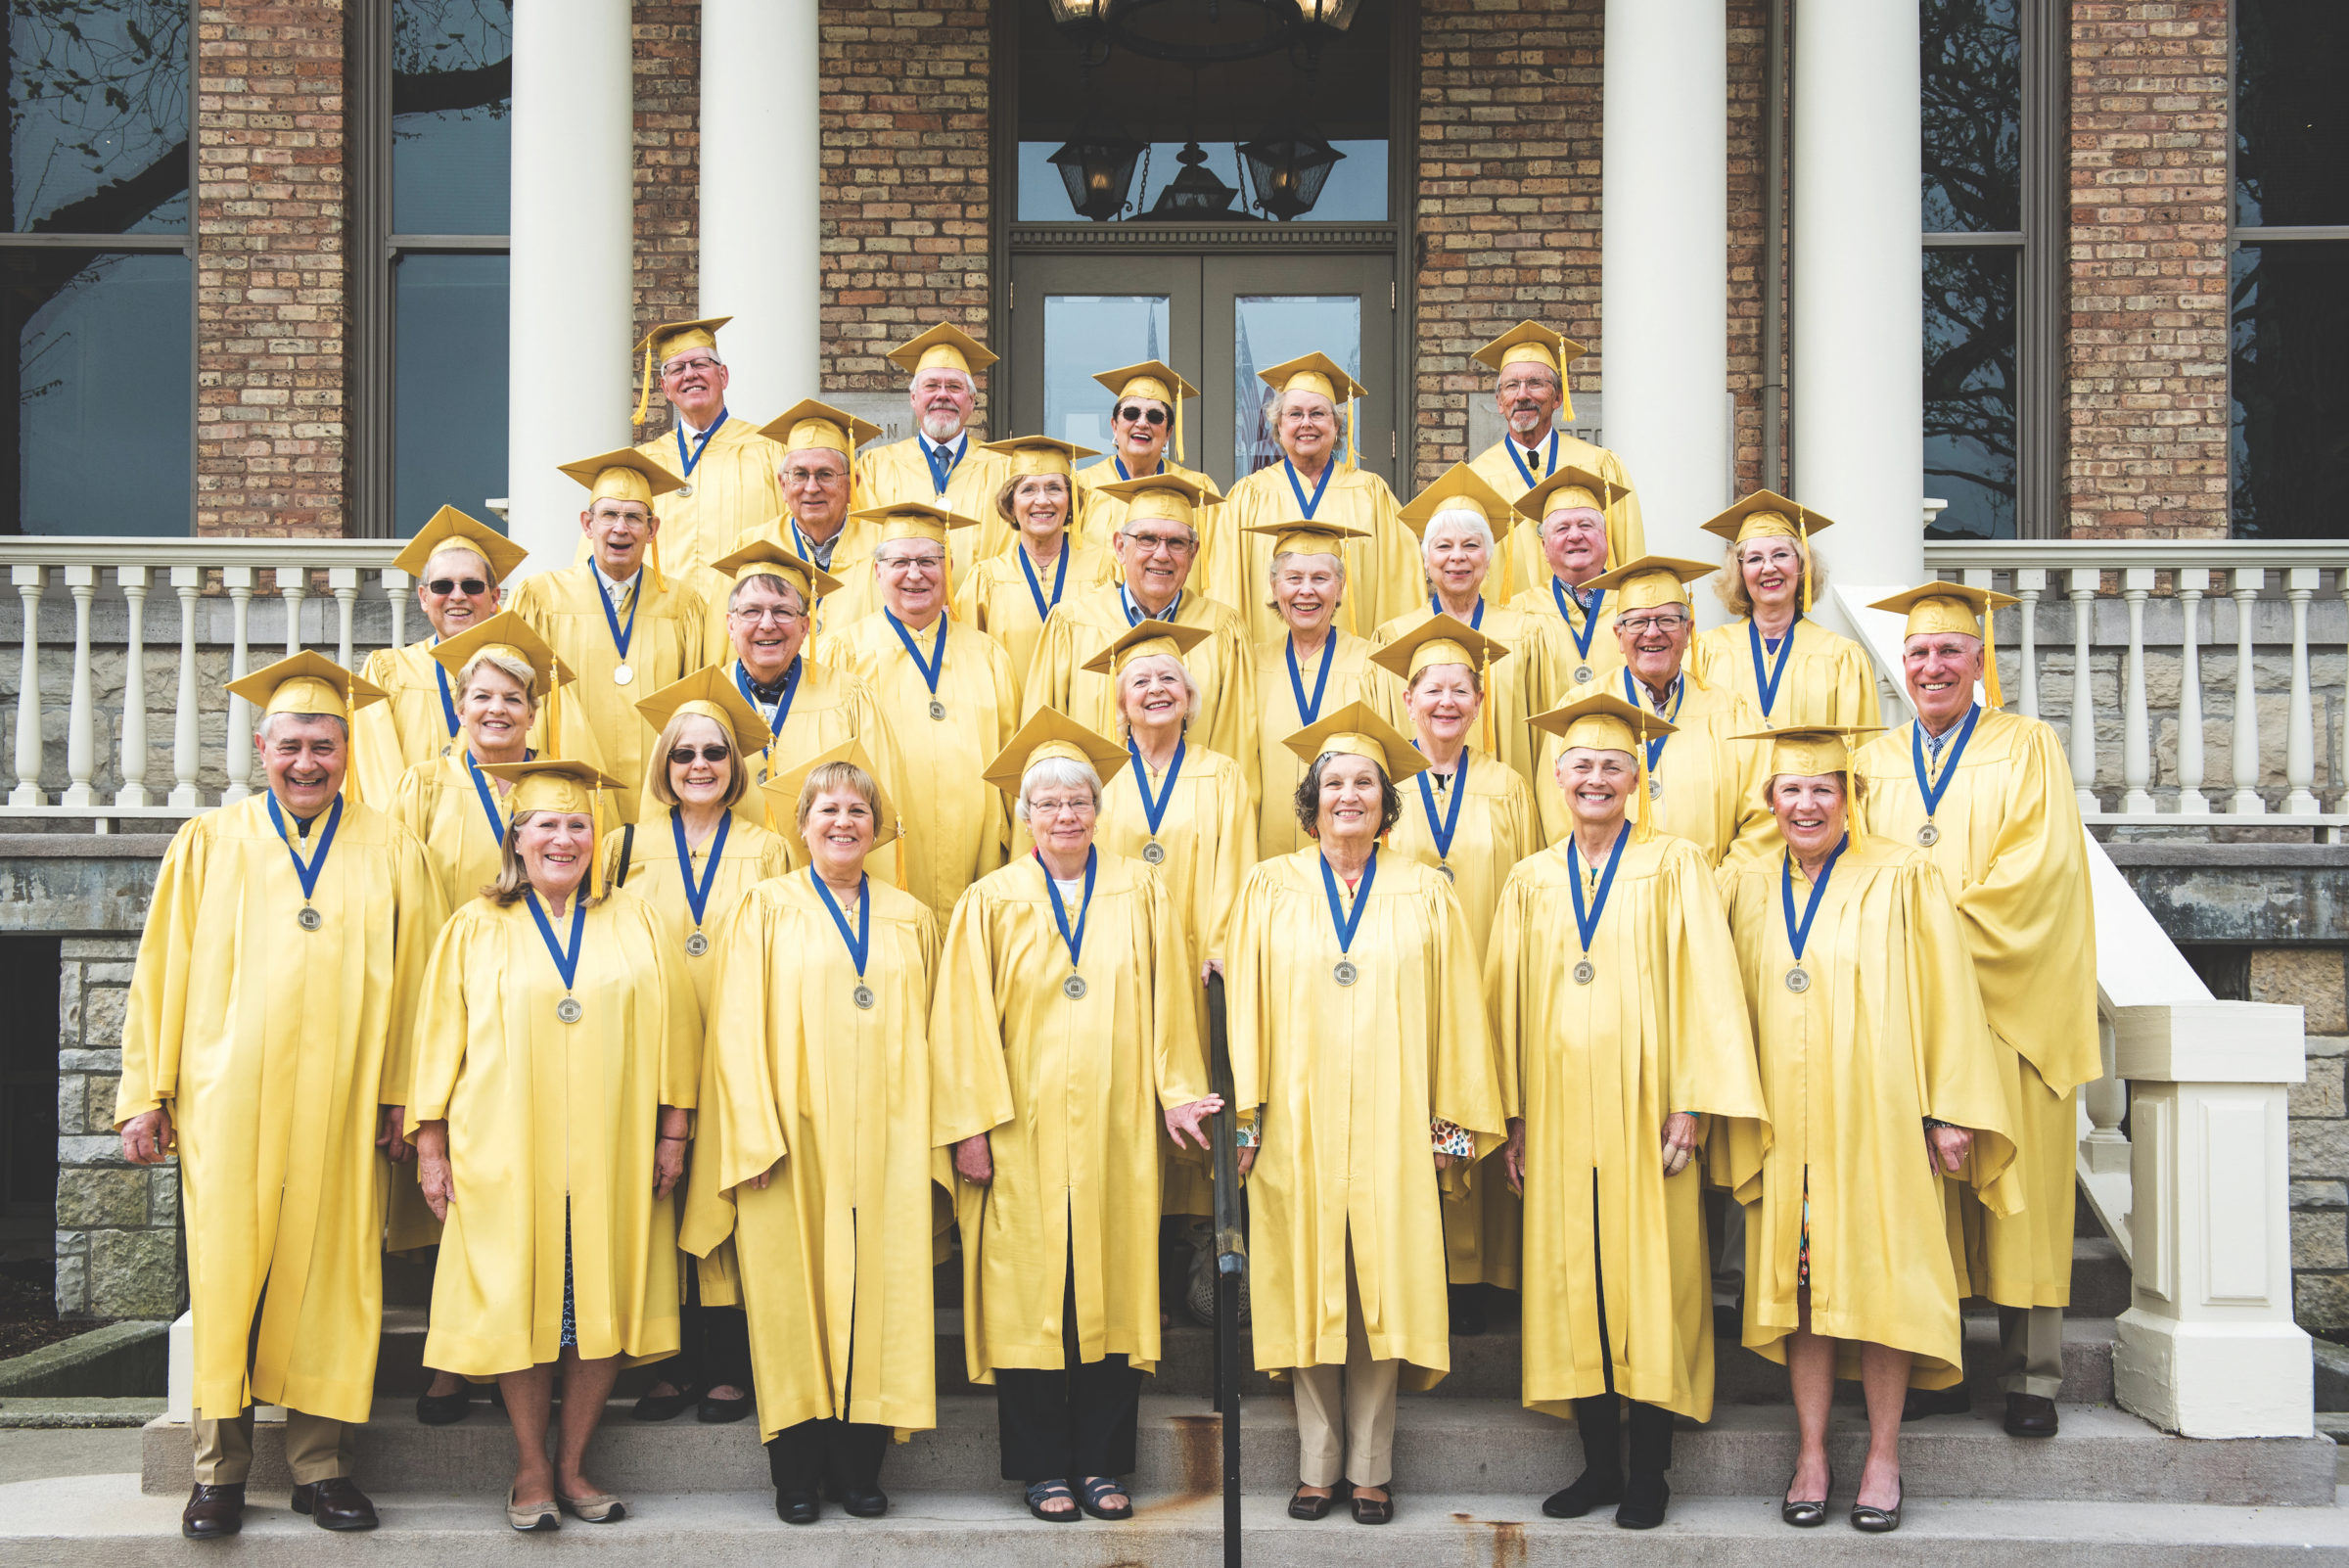 Graduates of the class of 1968 celebrate their 50th reunion and join the Golden Circle.